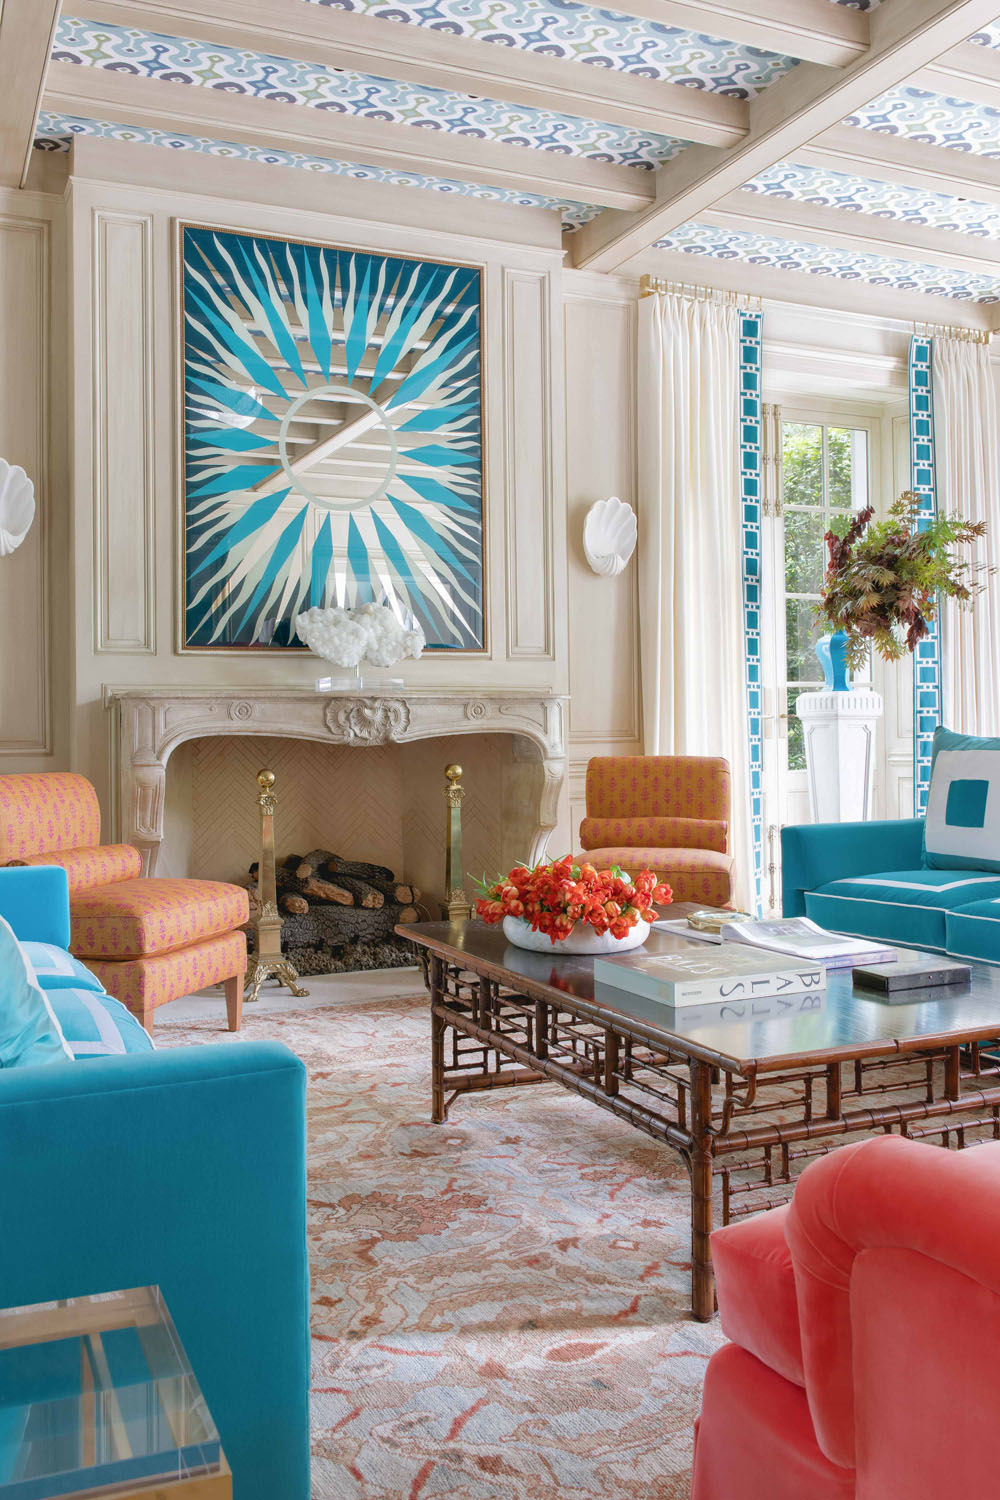 Timeless Decor with Splashes of Color